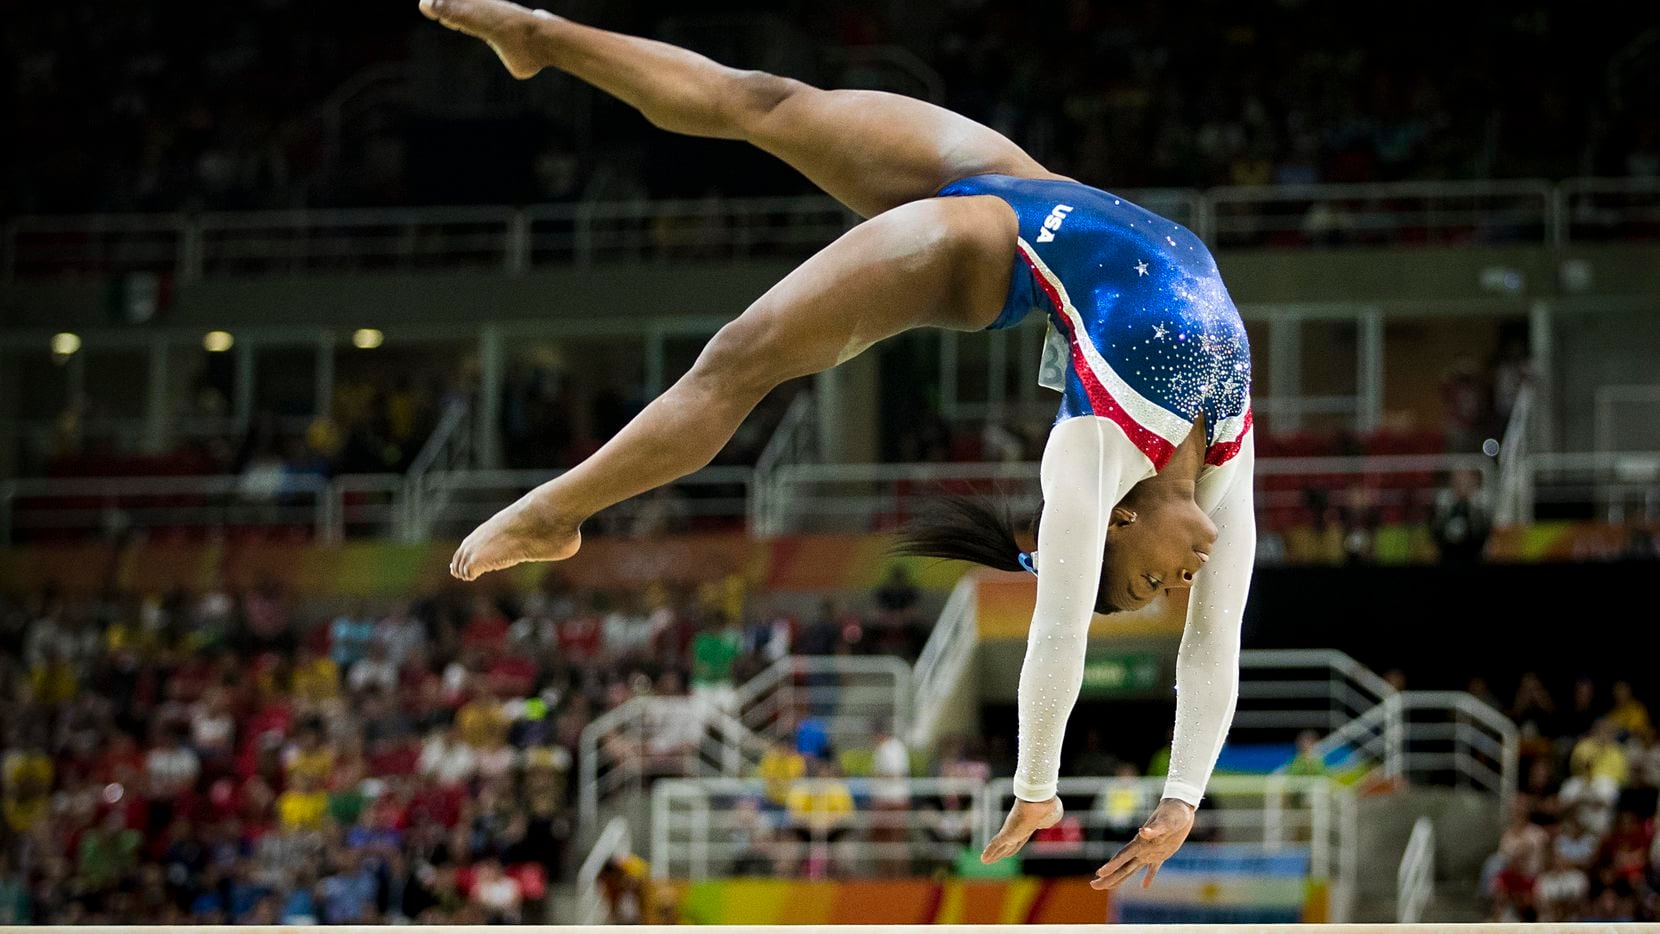 Fort Worth To Host Usa Gymnastics National Championships A Key Event On Path To Tokyo Olympics